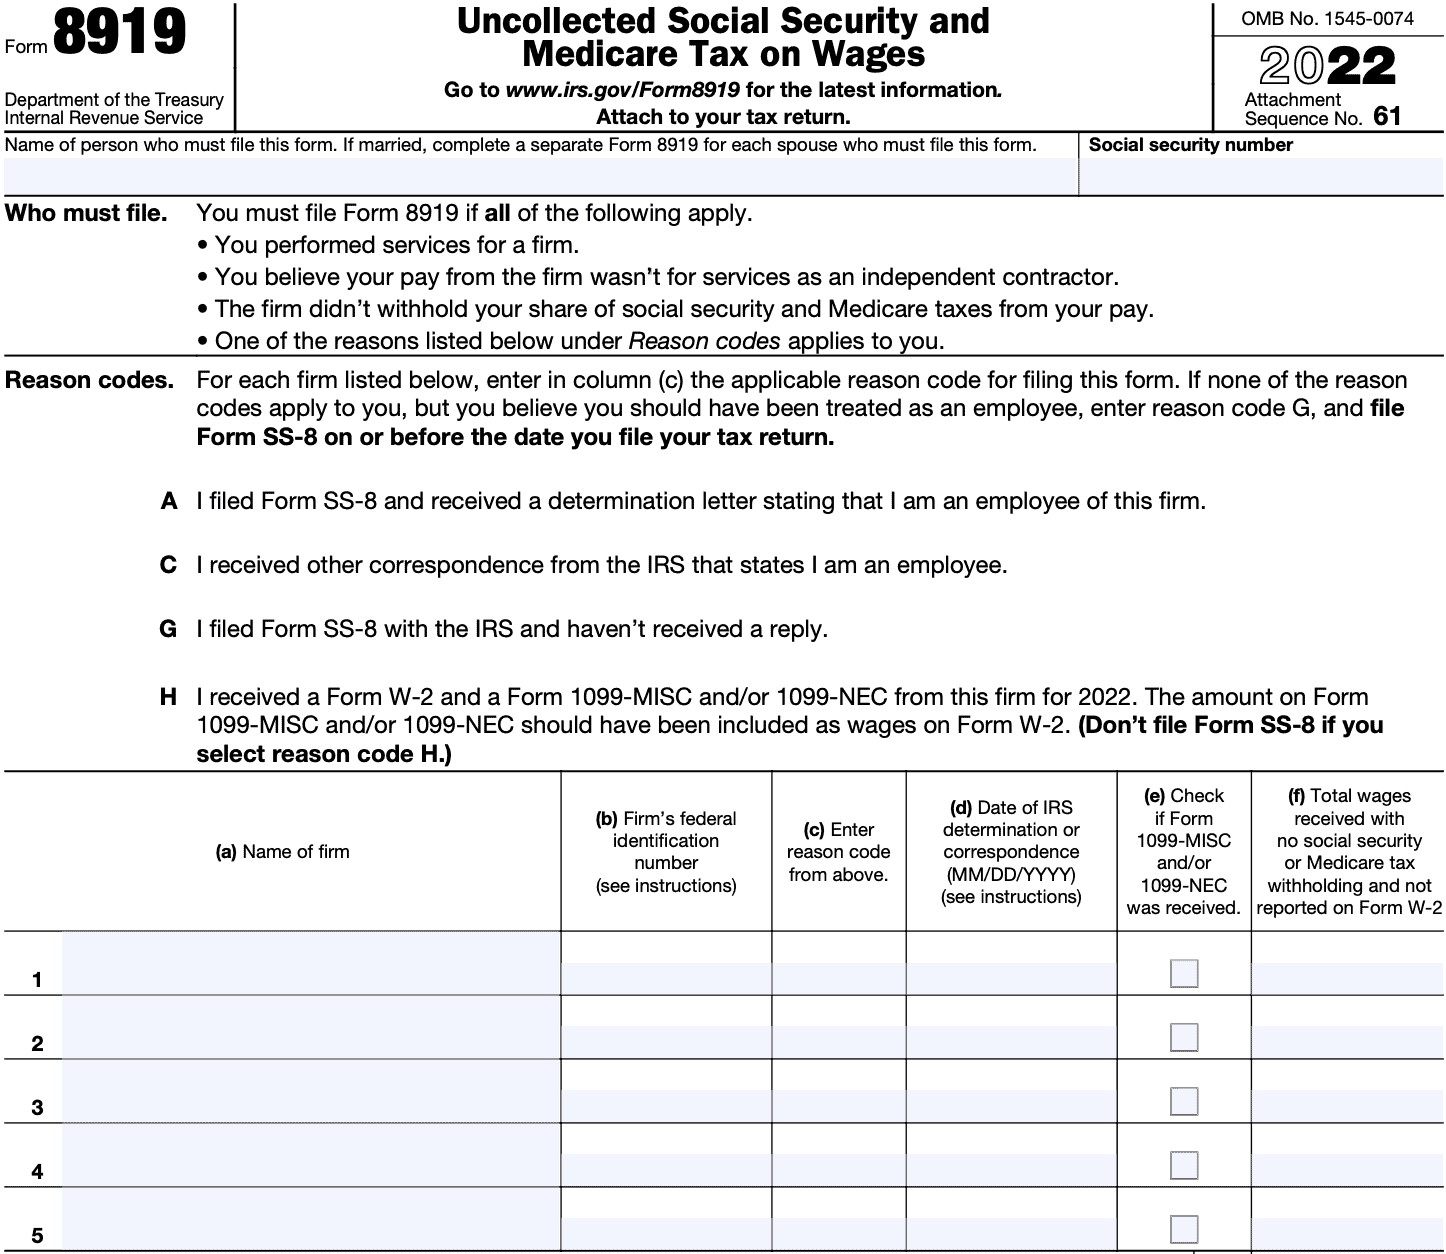 irs form 8919, taxpayer information, reason codes, lines 1 through 5